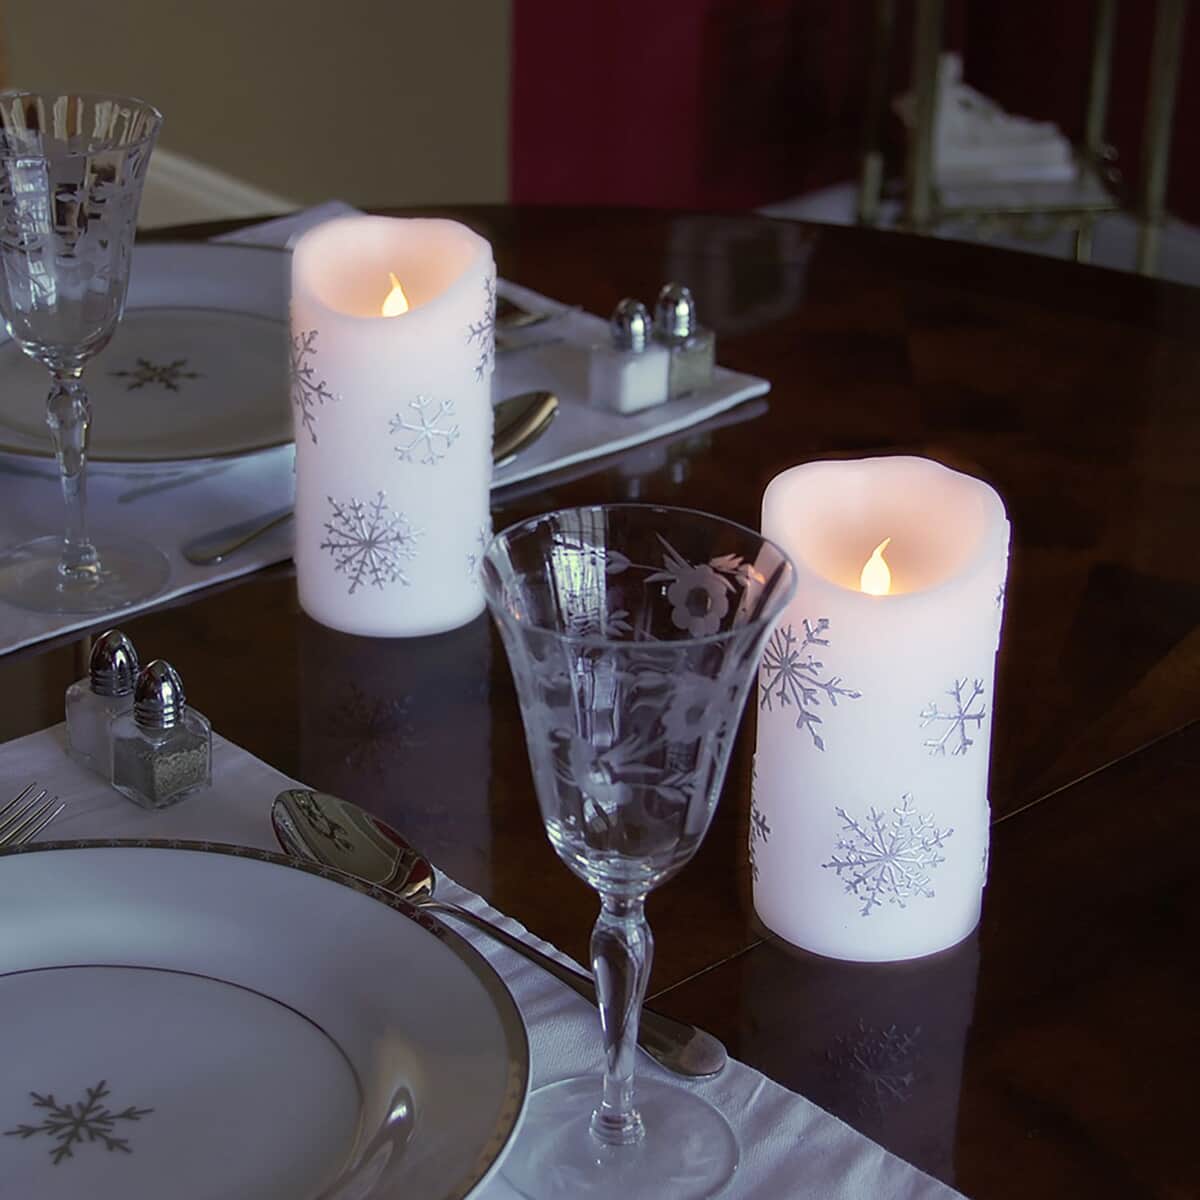 Lumabase Set of 2 Battery Operated Flameless Wax Candles -Snowflakes image number 1